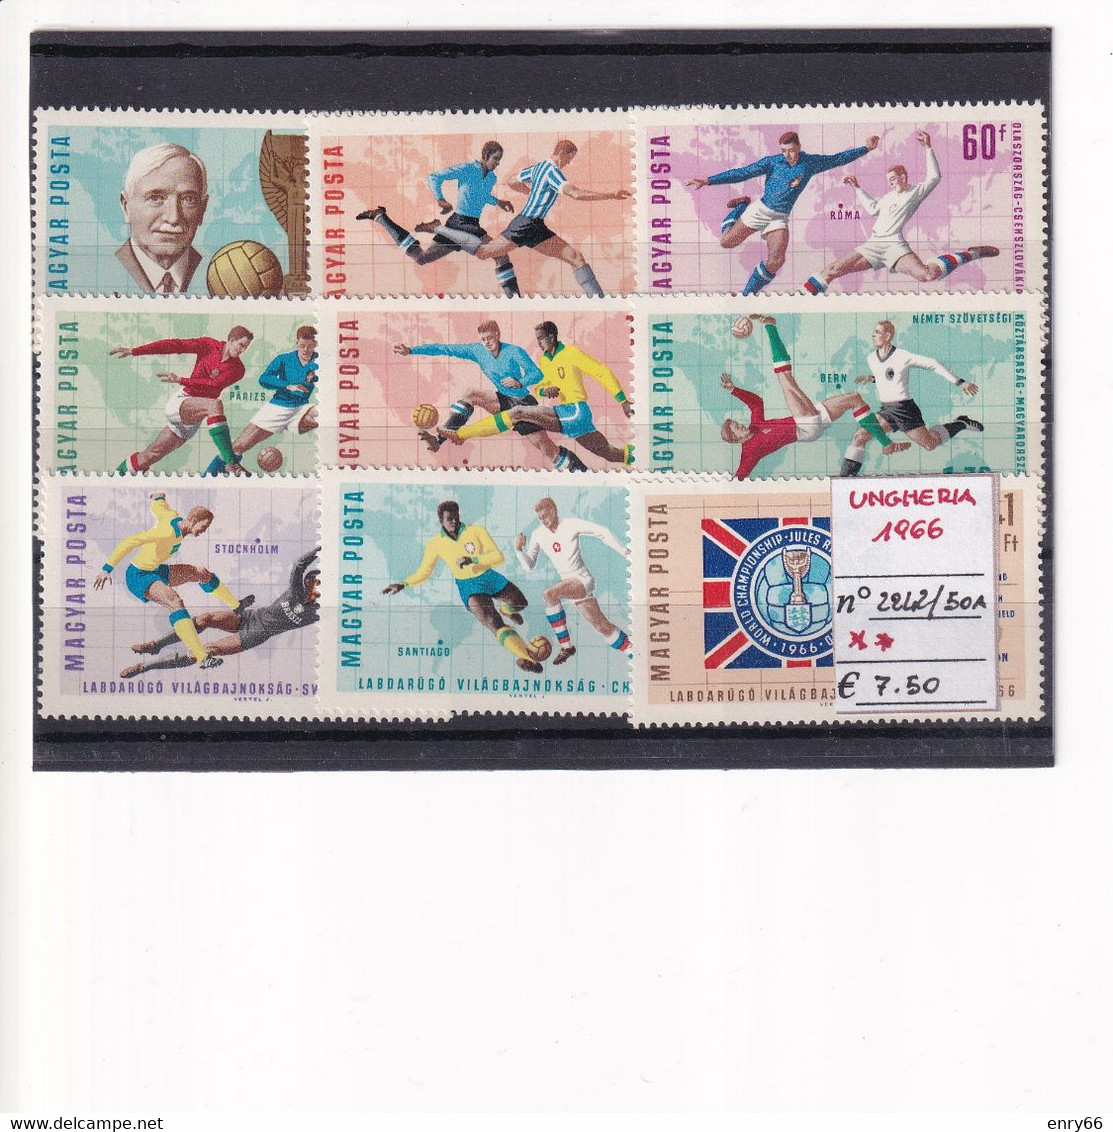 UNGHERIA 1966 N° 2242A/50A MNH - 1966 – Angleterre